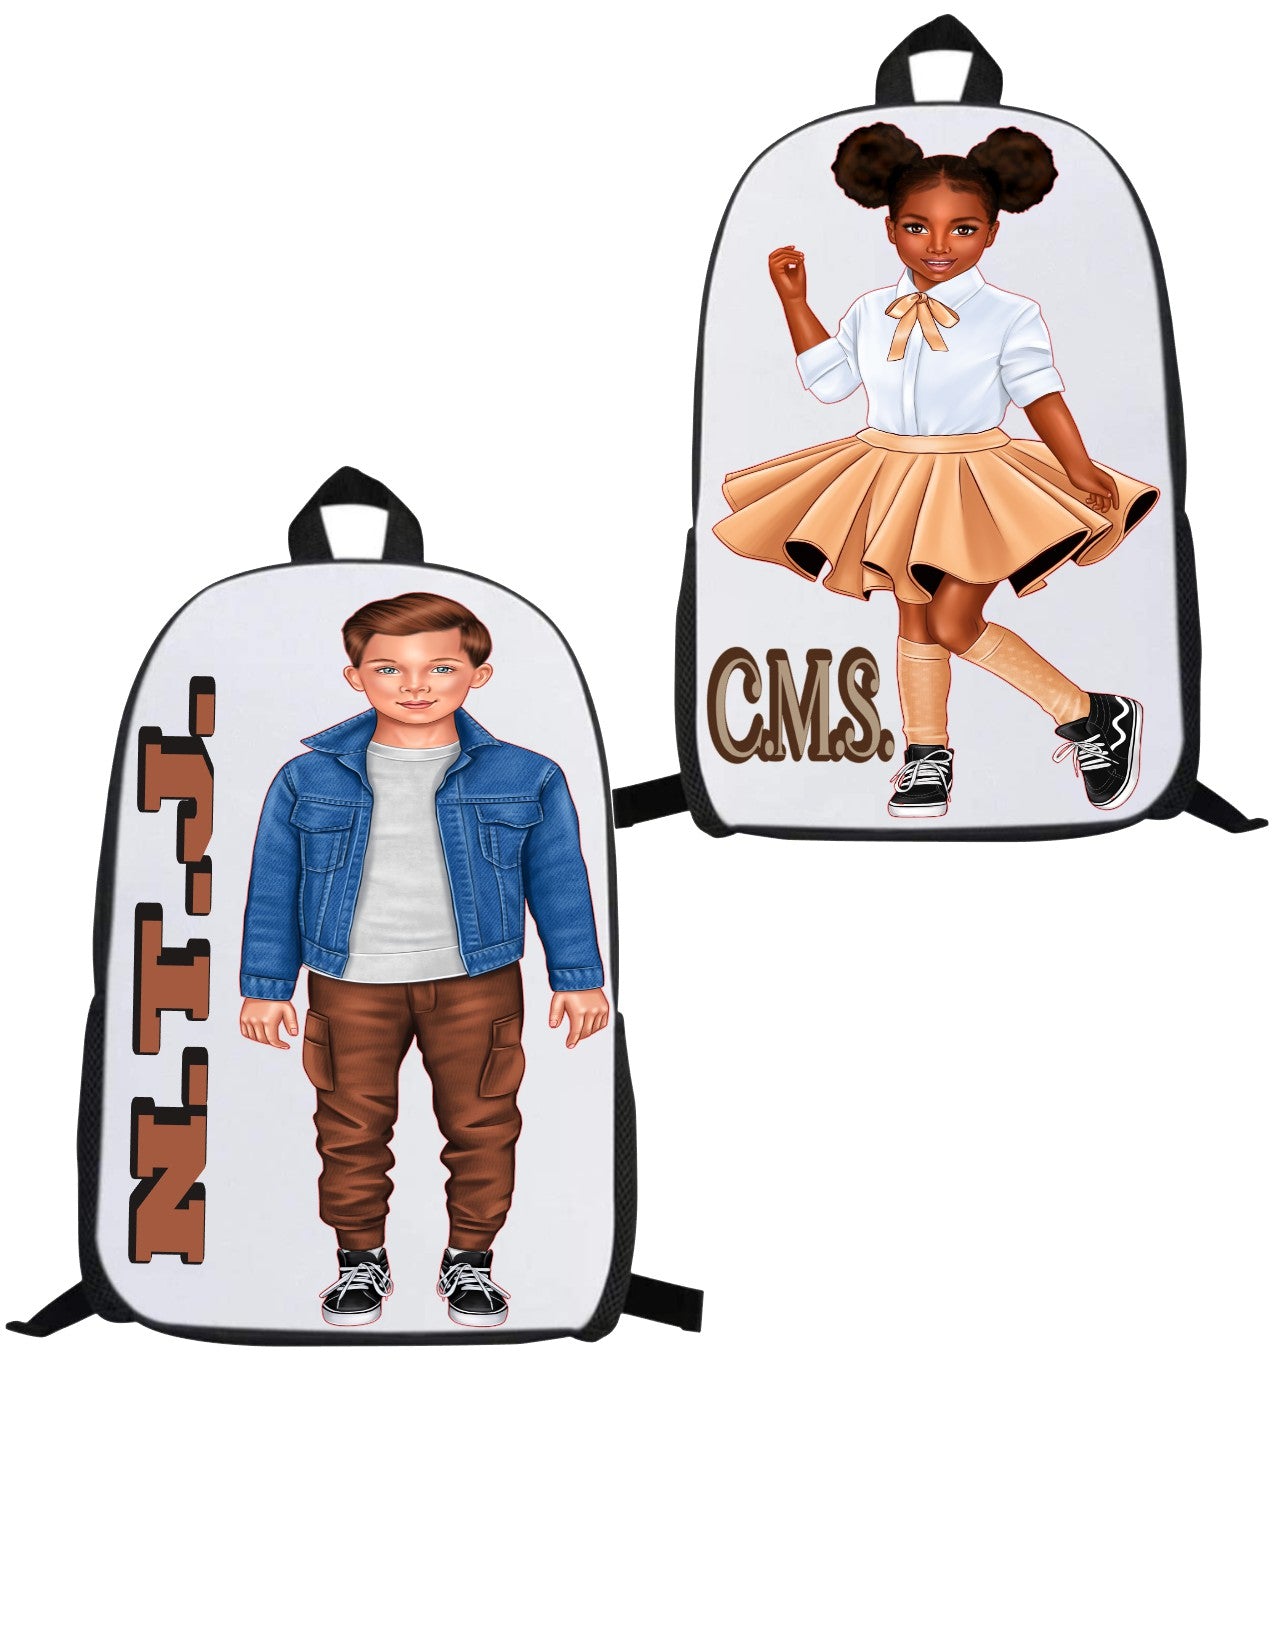 Get your child their own monogrammed back pack with one of many images available or their own photo